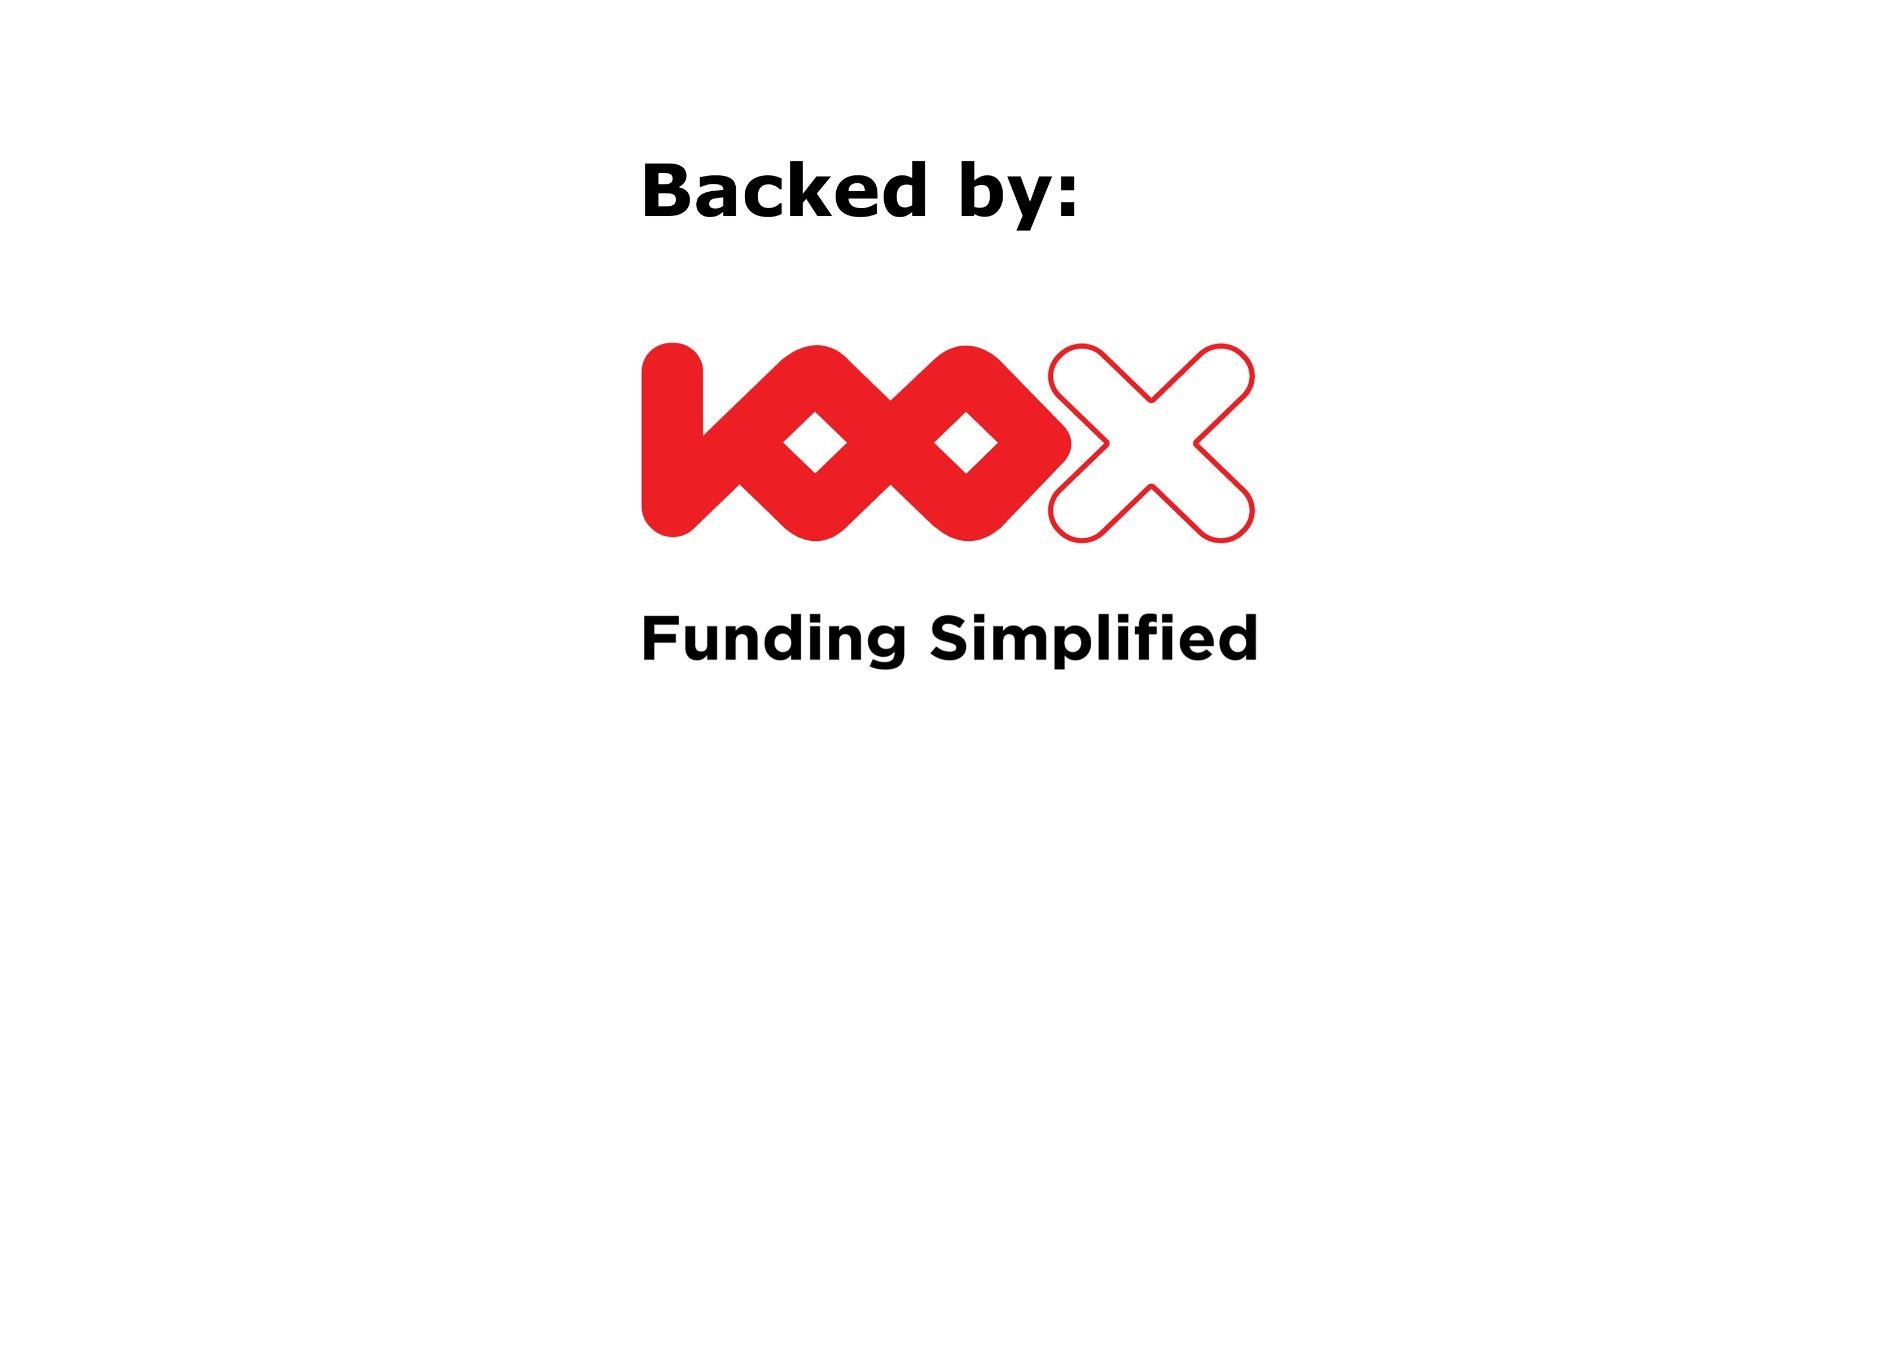 Backed by 100x